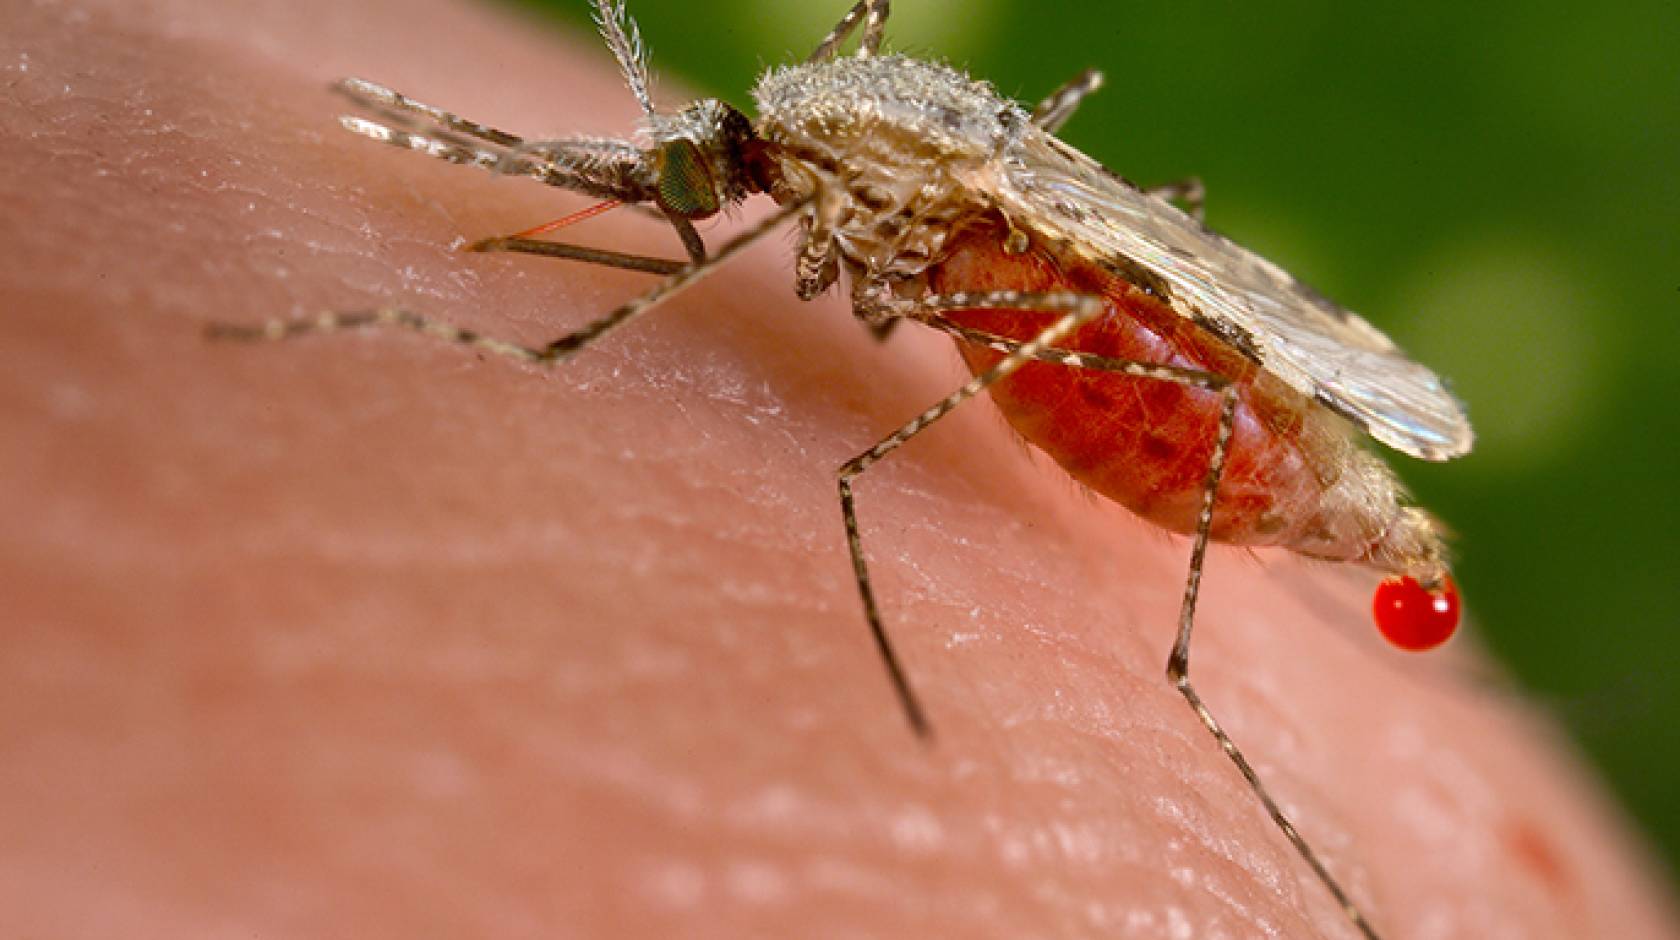 An Anopheles stephensi mosquito obtains a blood meal from a human host through its pointed proboscis. A known malarial vector, the species can found from Egypt all the way to China.